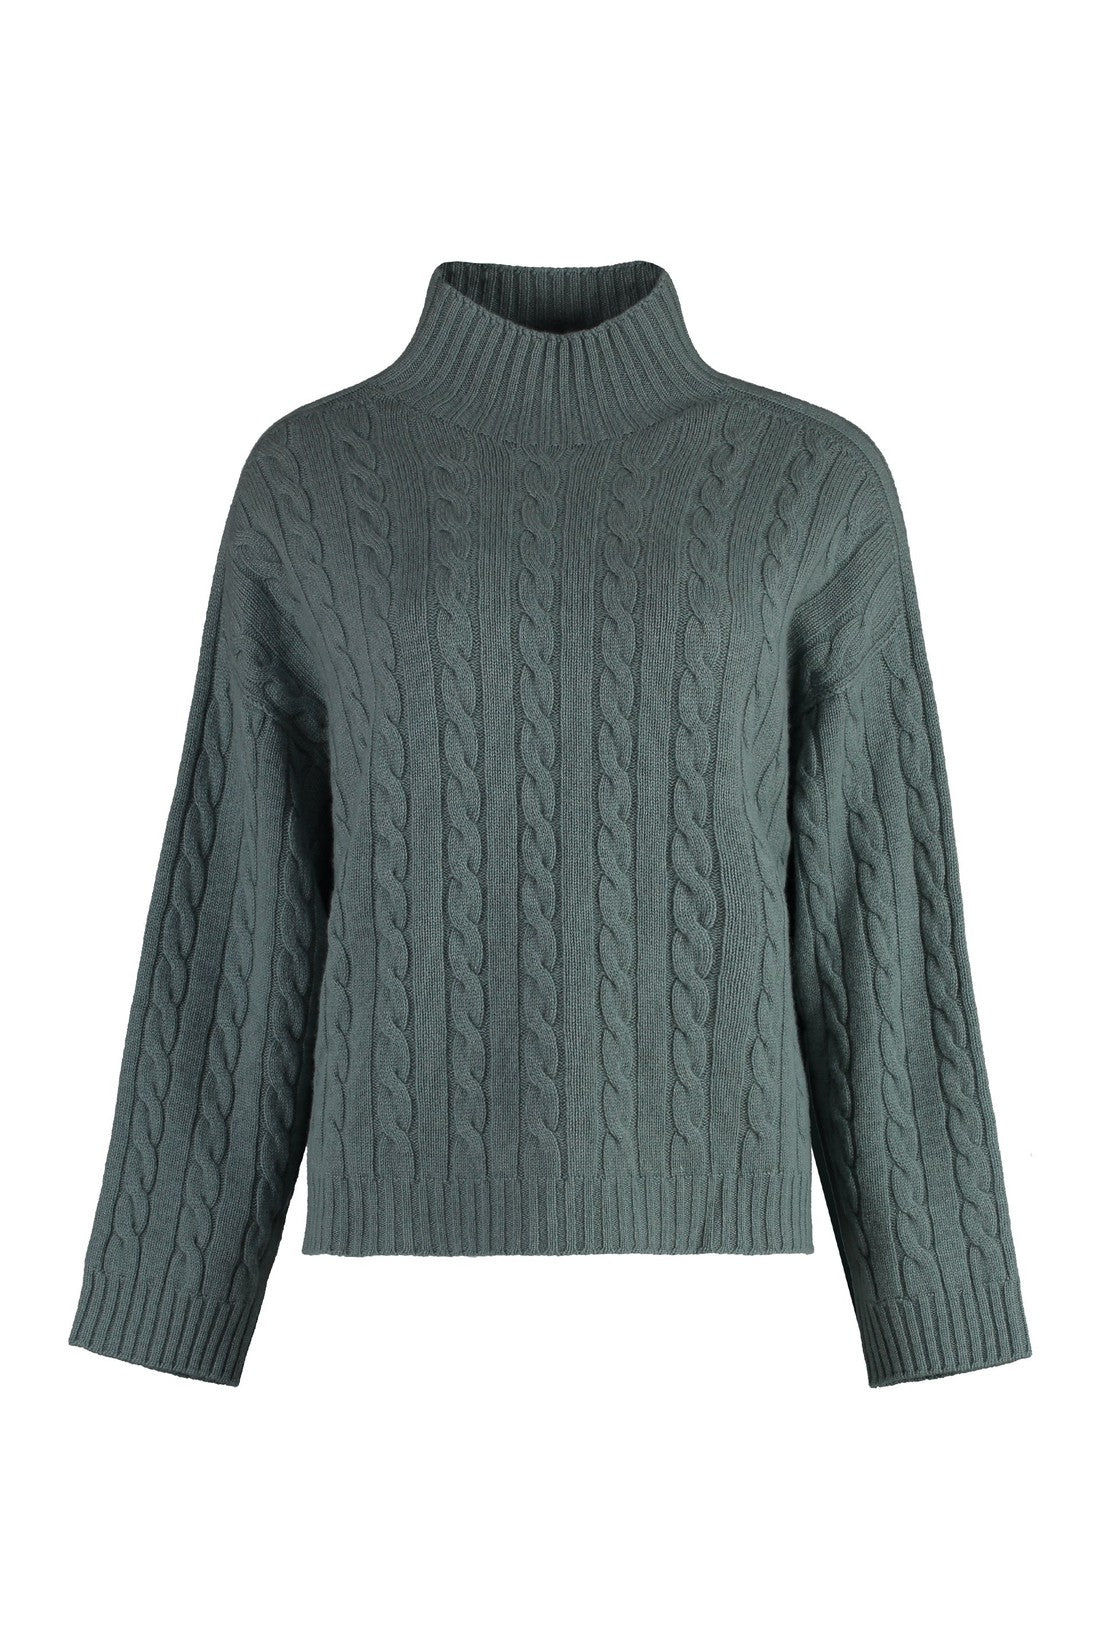 Peserico-OUTLET-SALE-Wool blend turtleneck sweater-ARCHIVIST